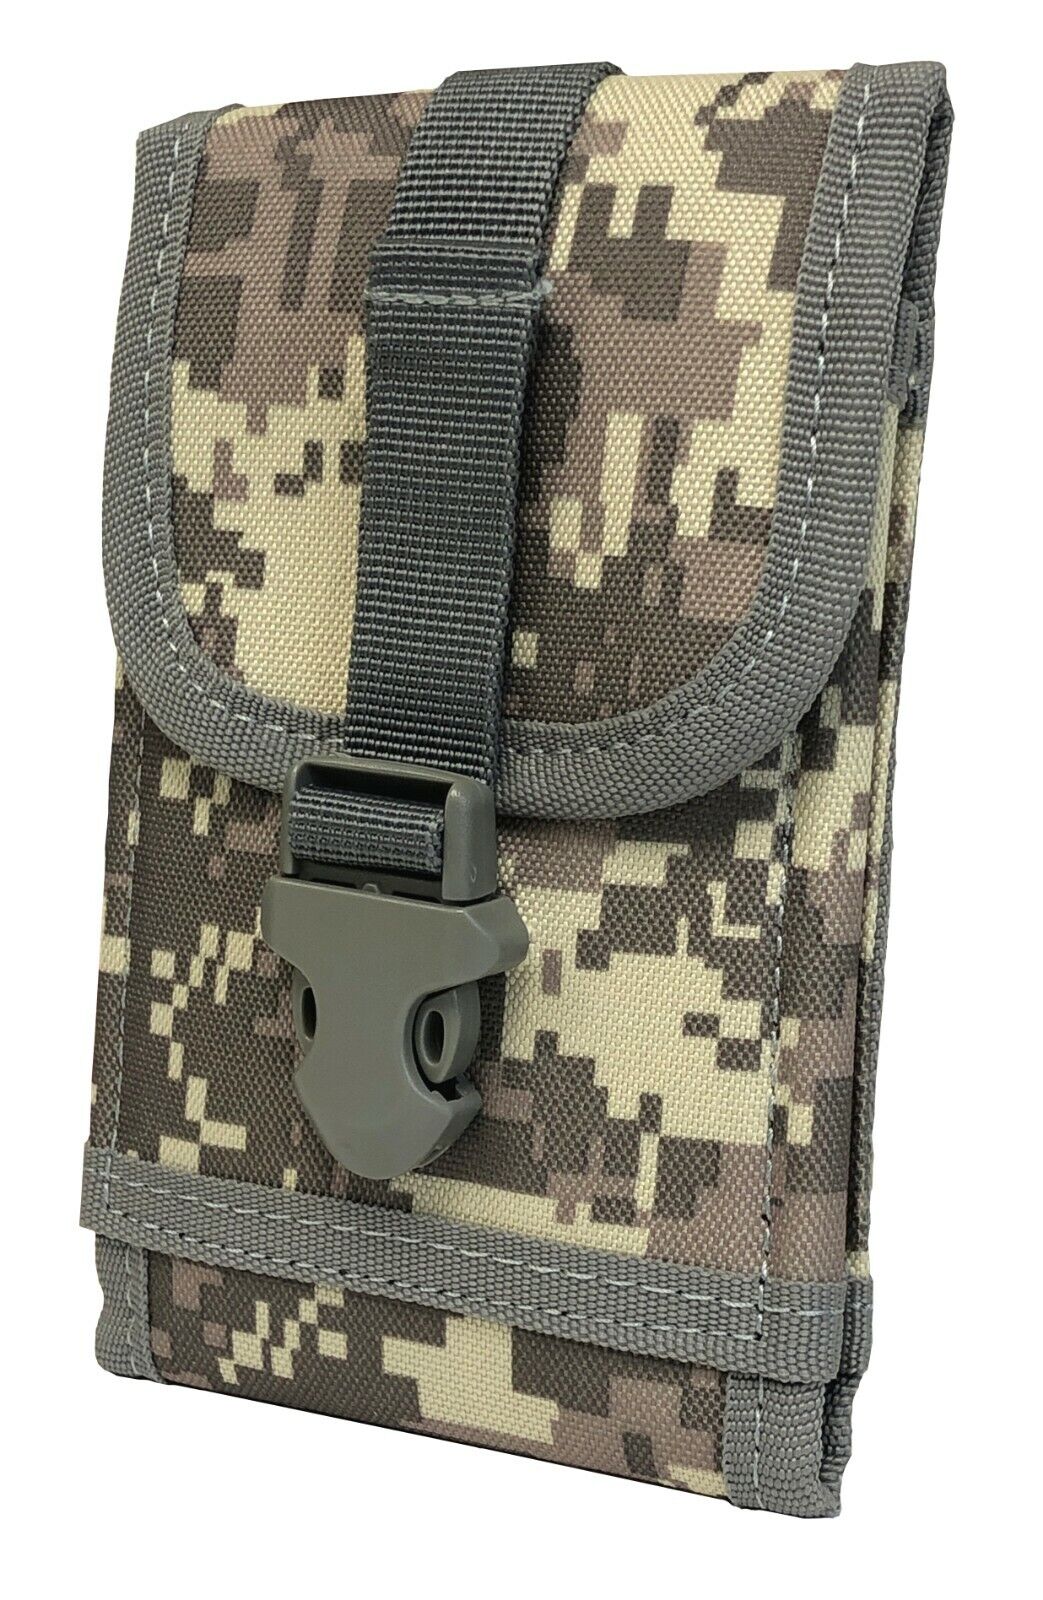 Premium Outdoor MOLLE Tactical Gear Cell Phone Vertical Case Pouch for MOTOROLA THINKPHONE